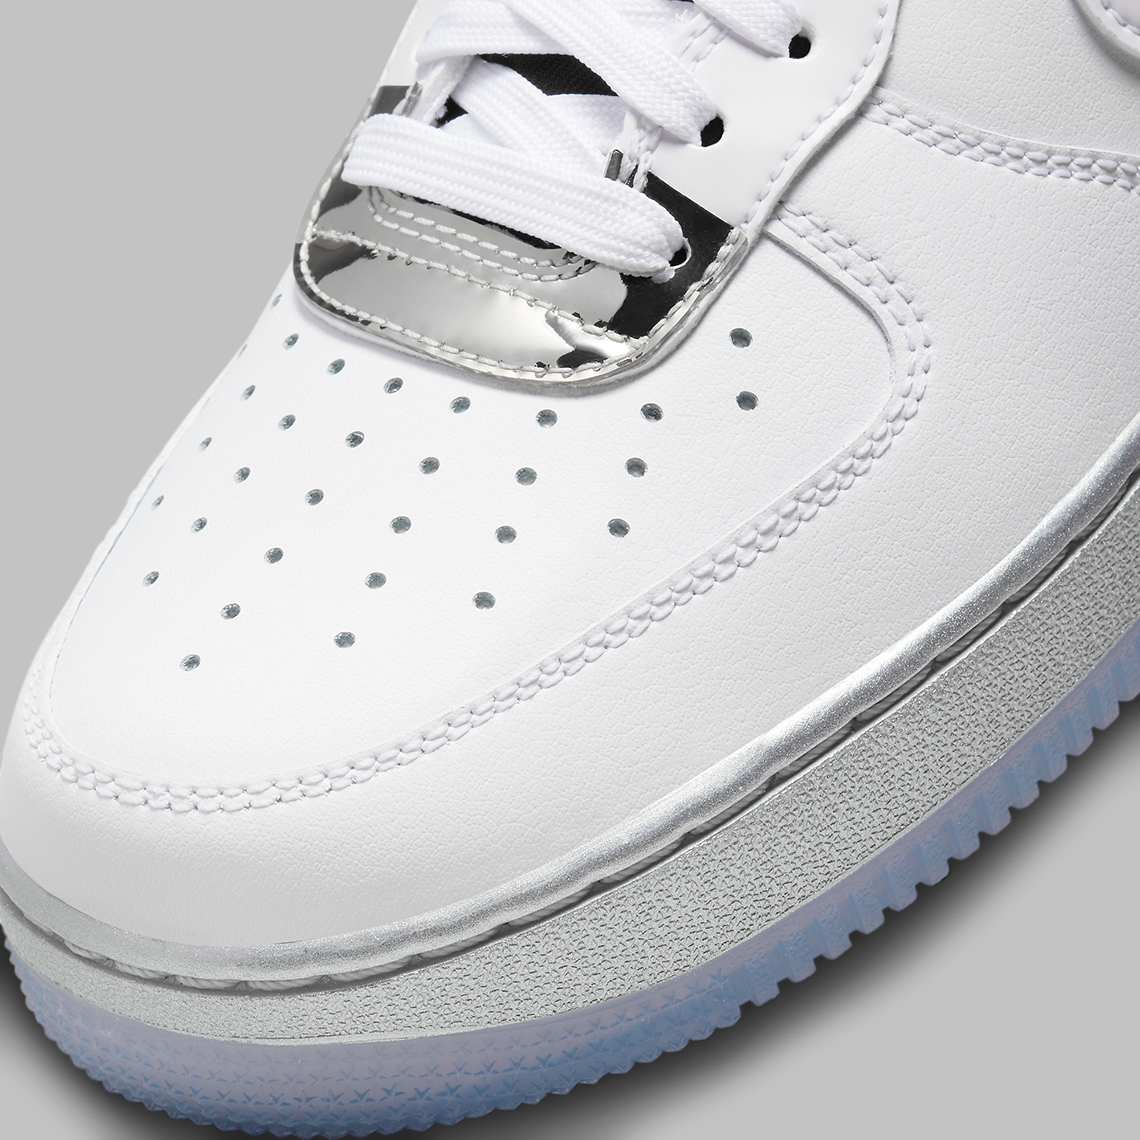 Nike Air Force 1 Low Chrome Pack Dx6764 100 4